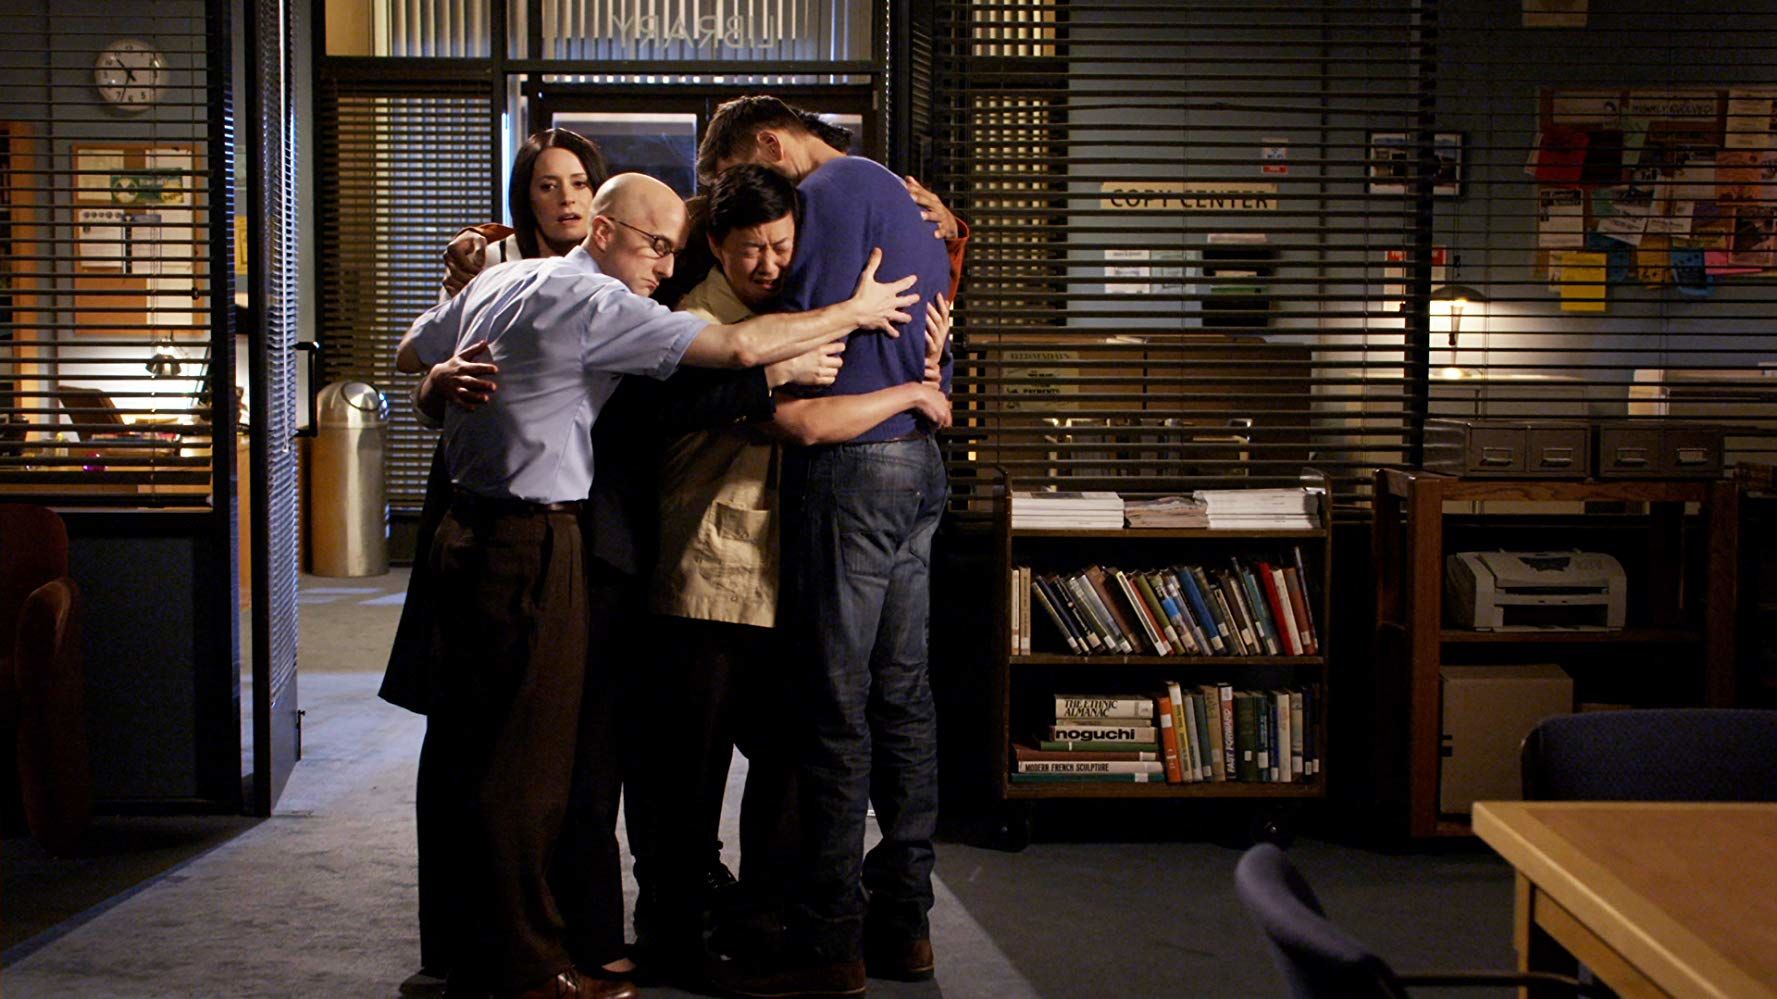 Community S6E13 Emotional Consequences of Broadcast Television